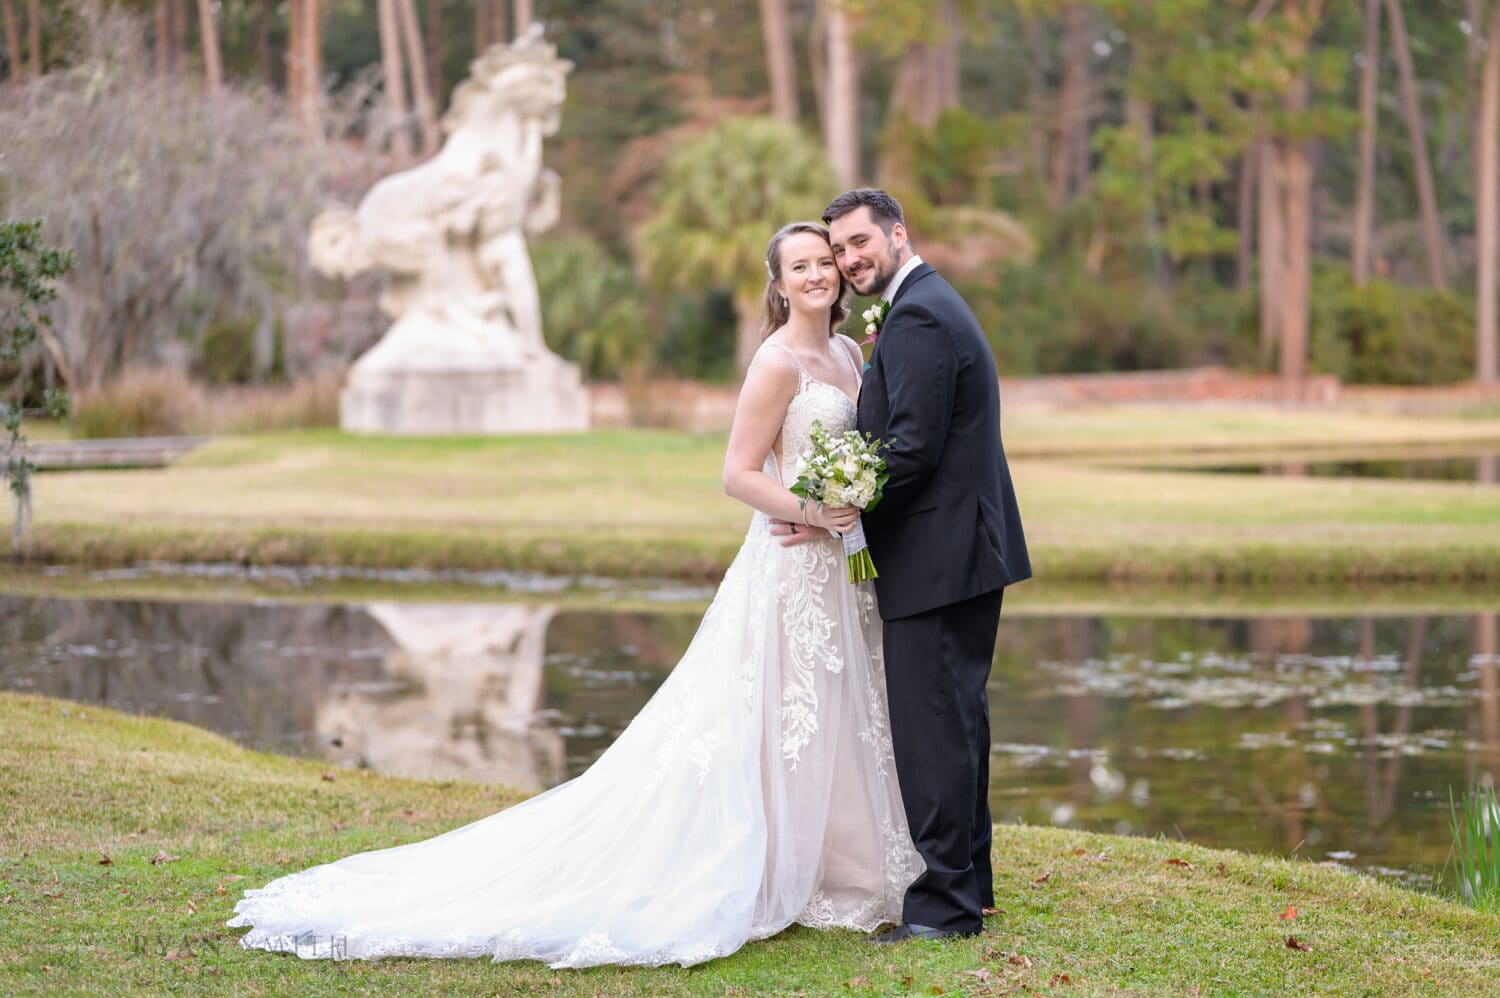 Bride and groom in front of the Youth Taming the Wild Statue - Brookgreen Gardens